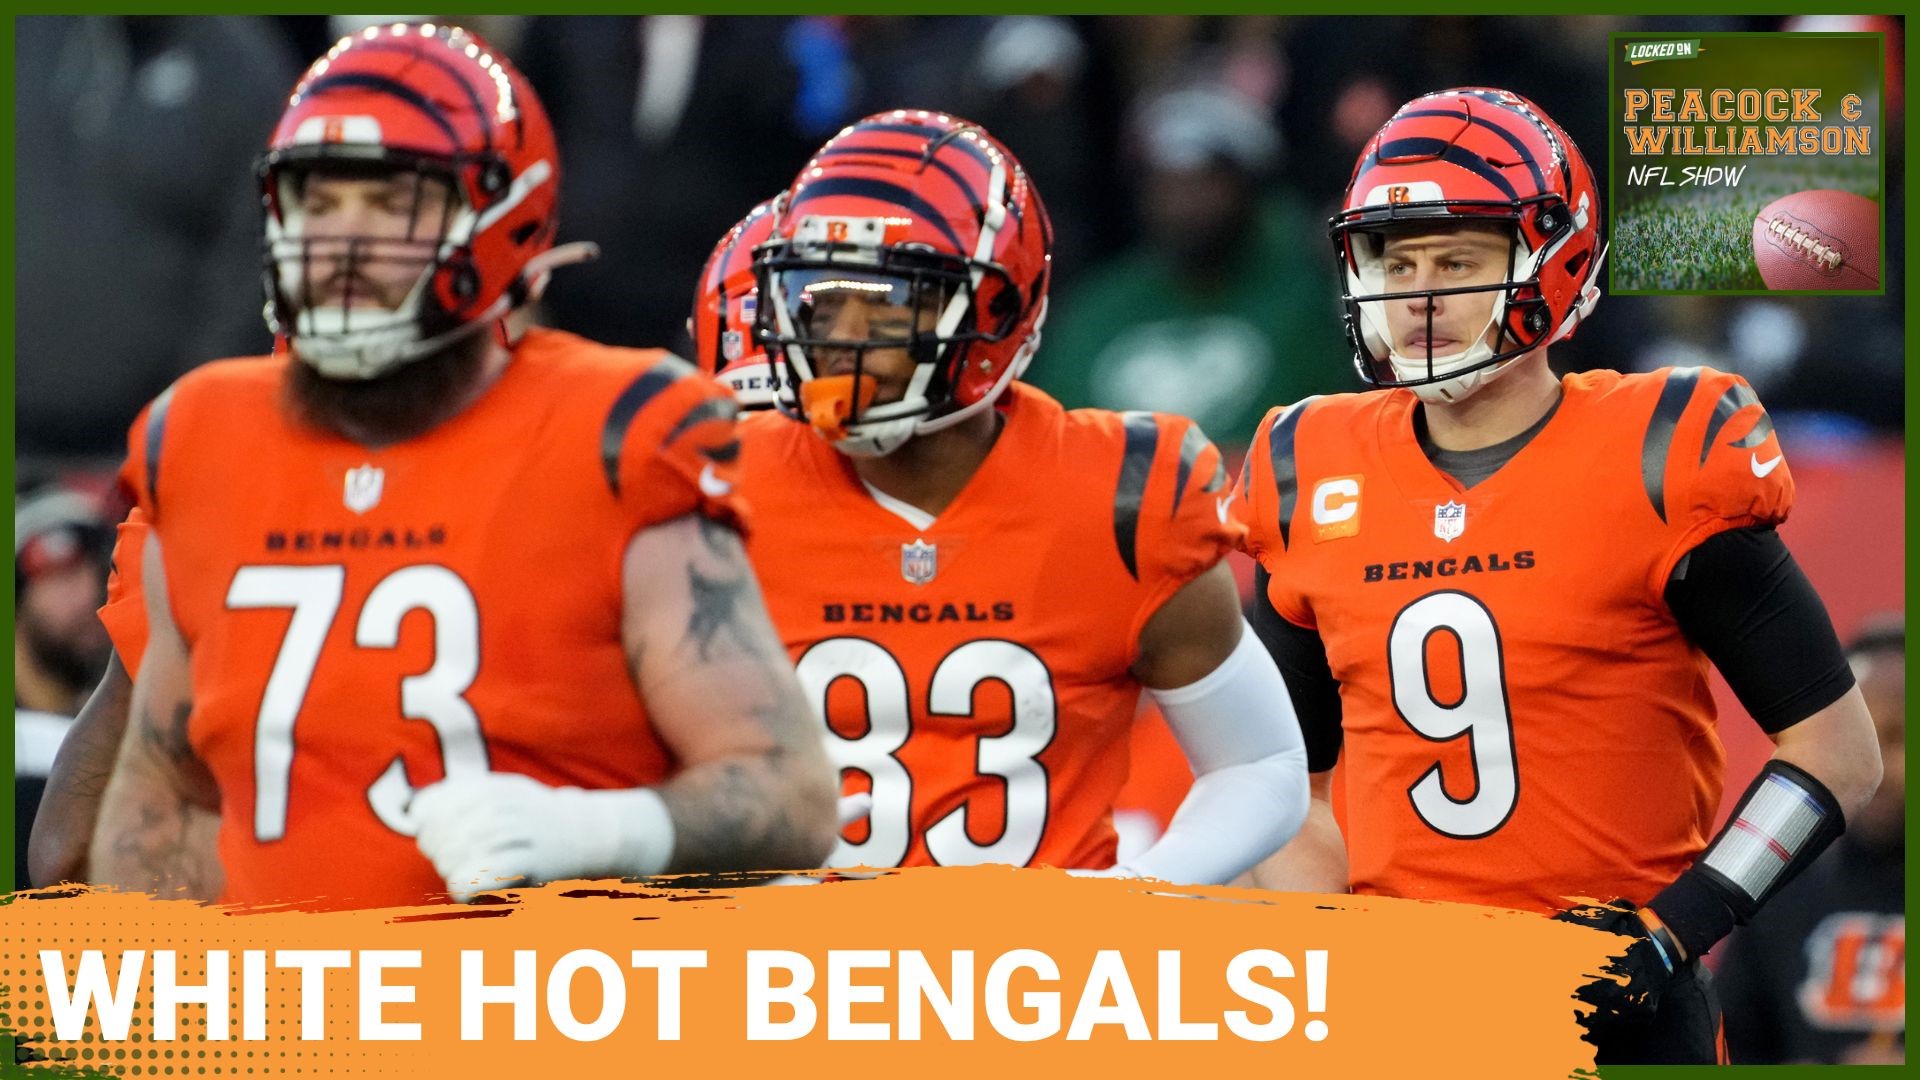 will bengals game be on peacock